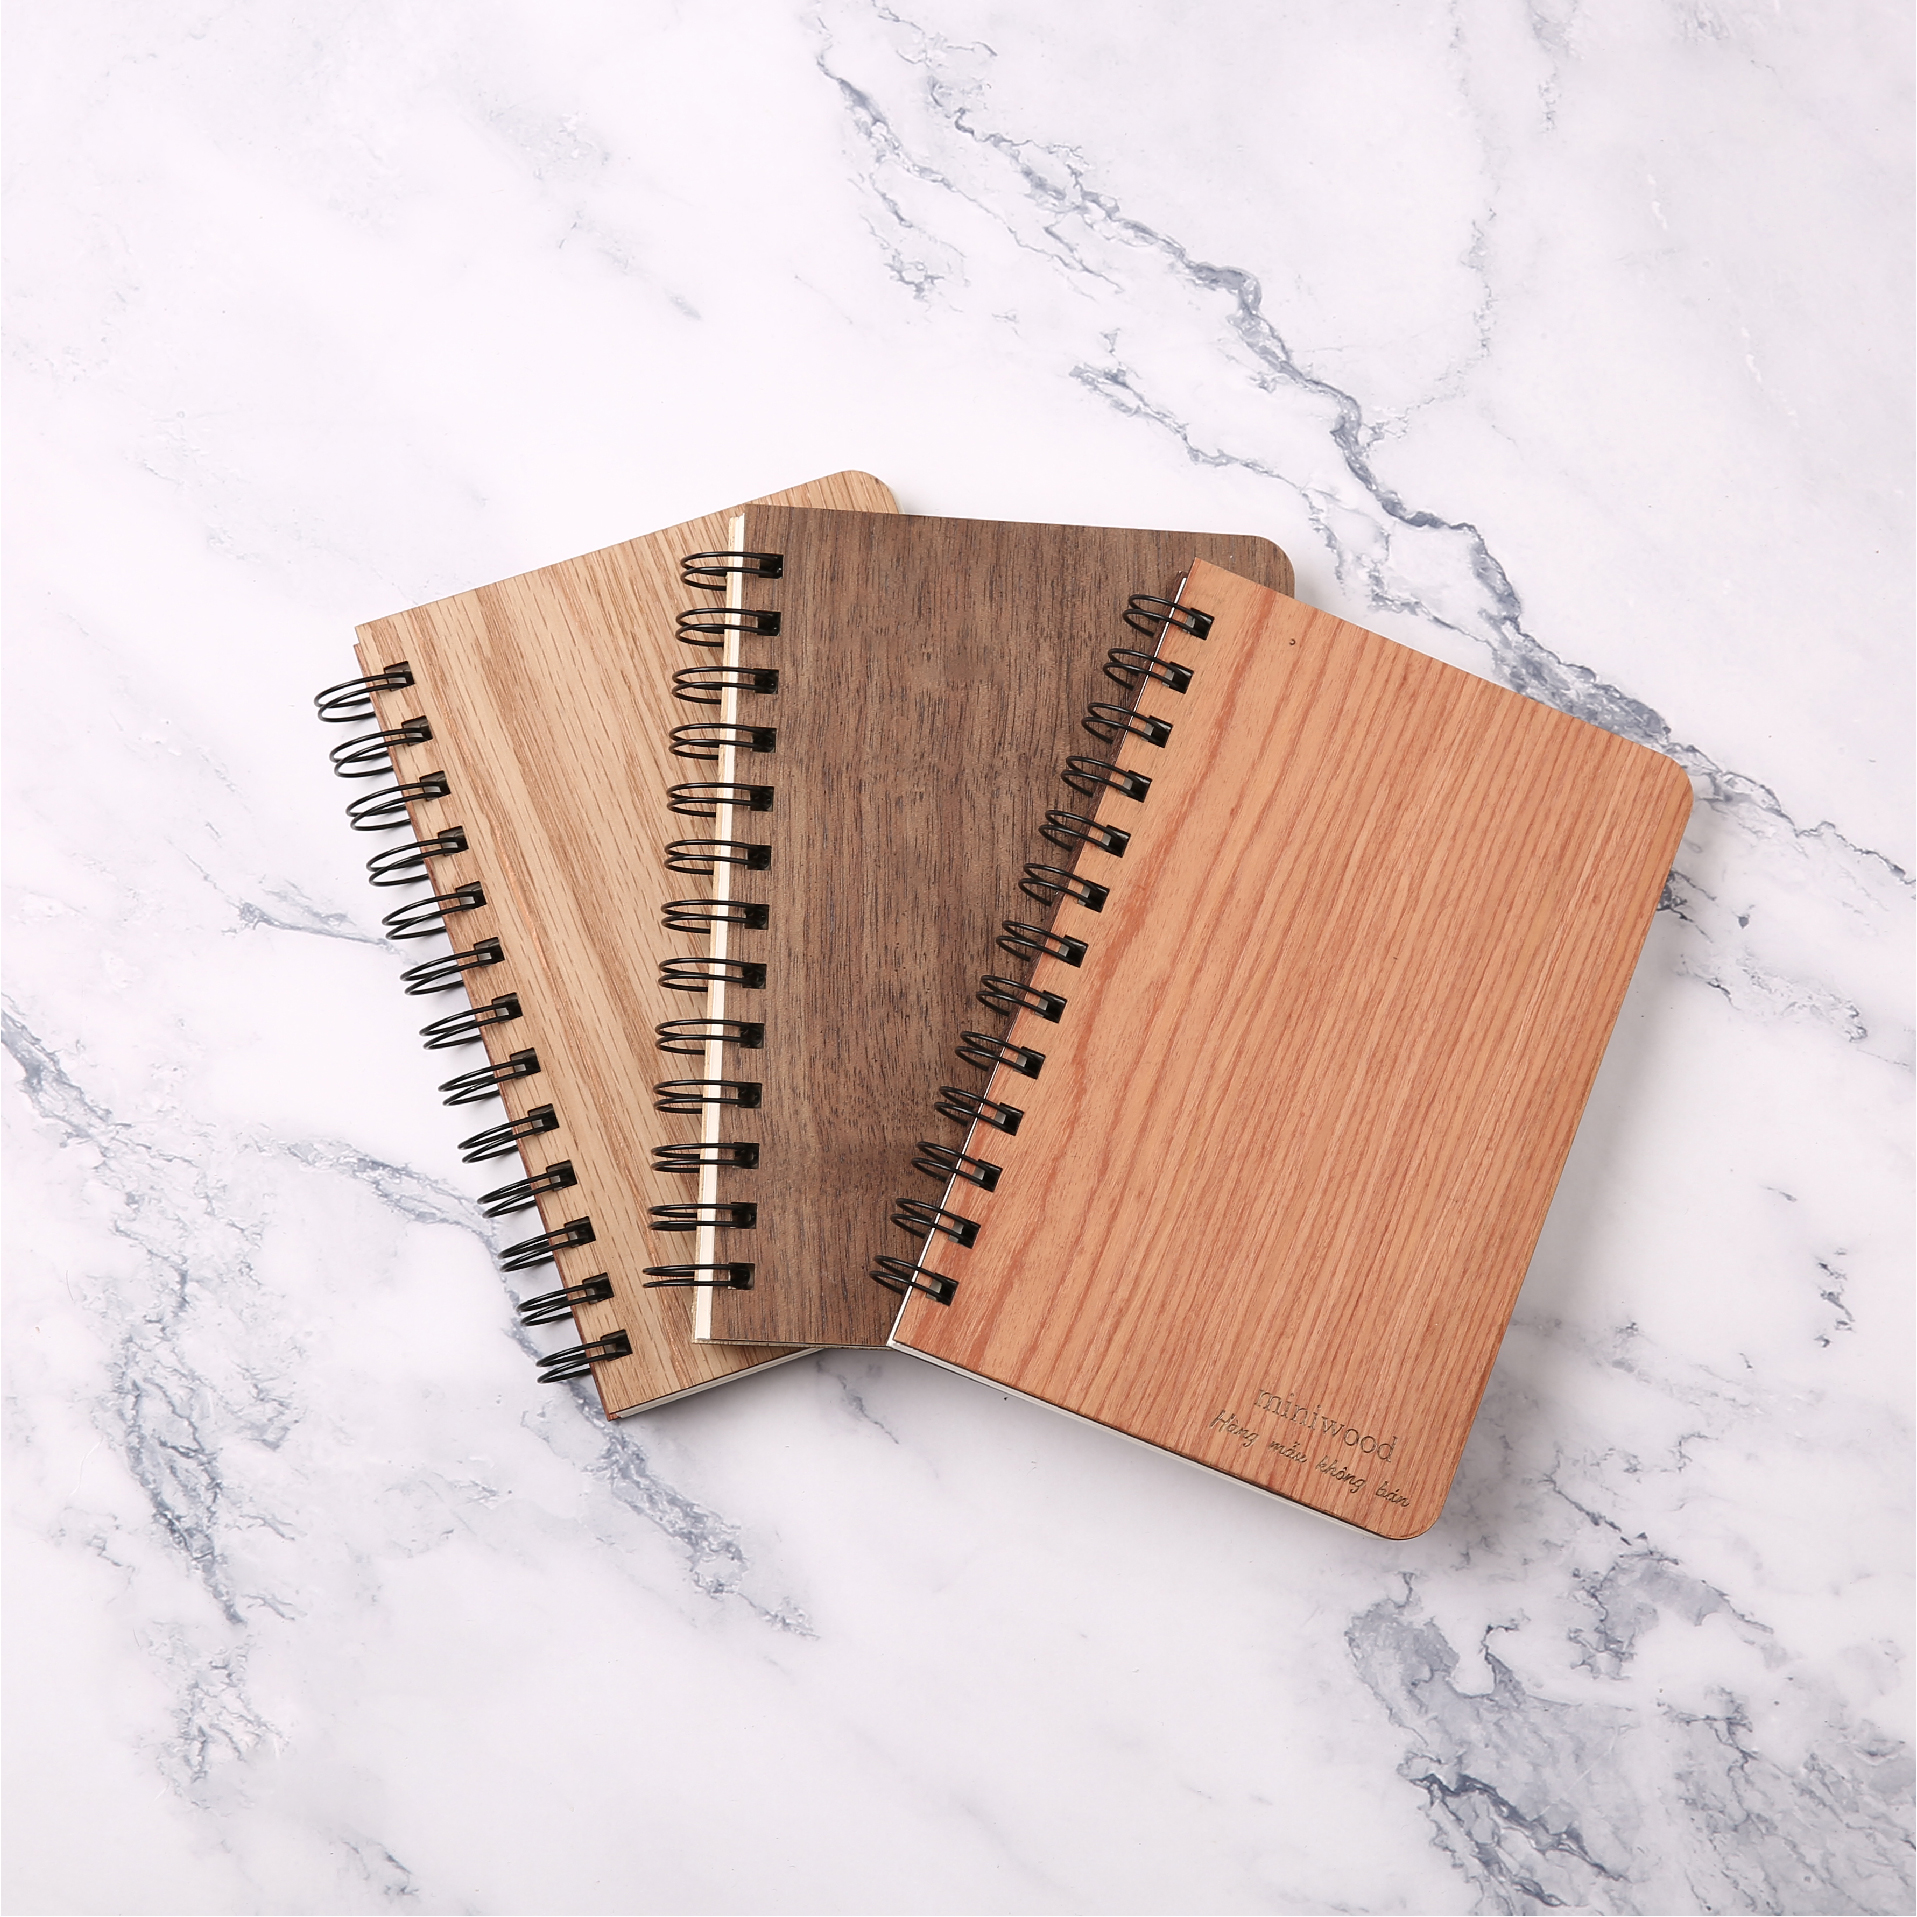 Wooden Stationery